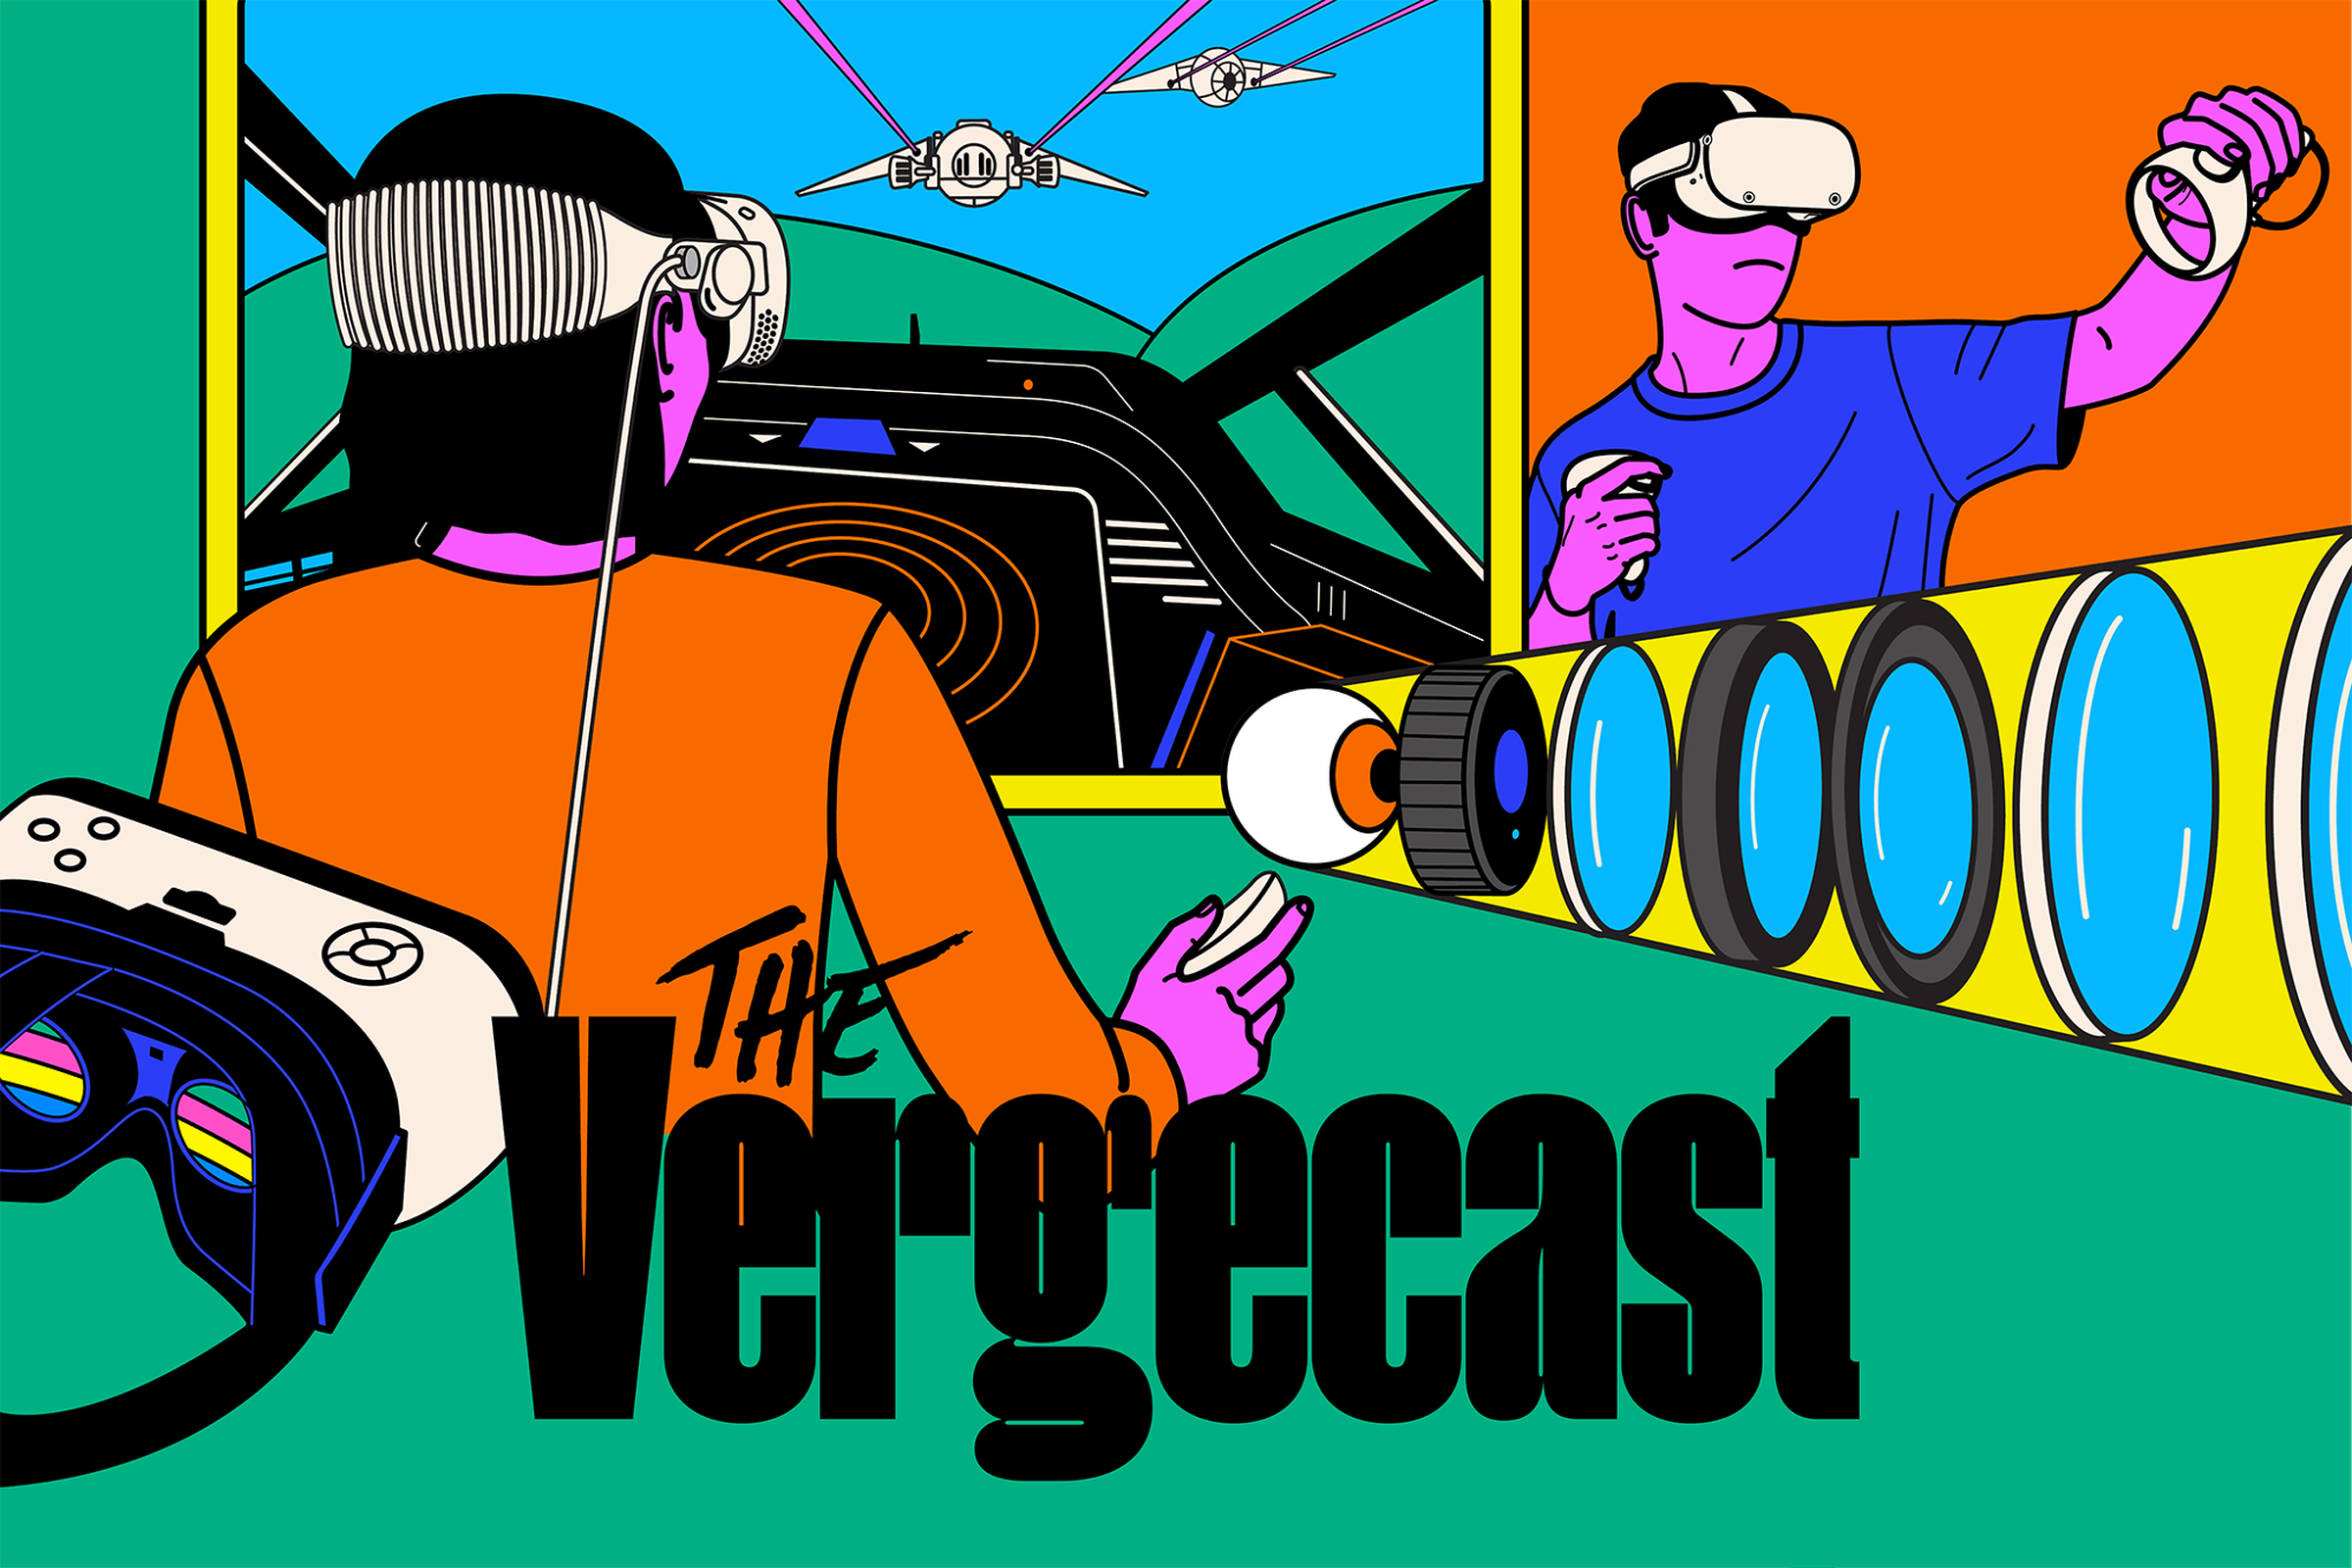 Vector illustration showing an aviation simulator being played by people with VR headsets.